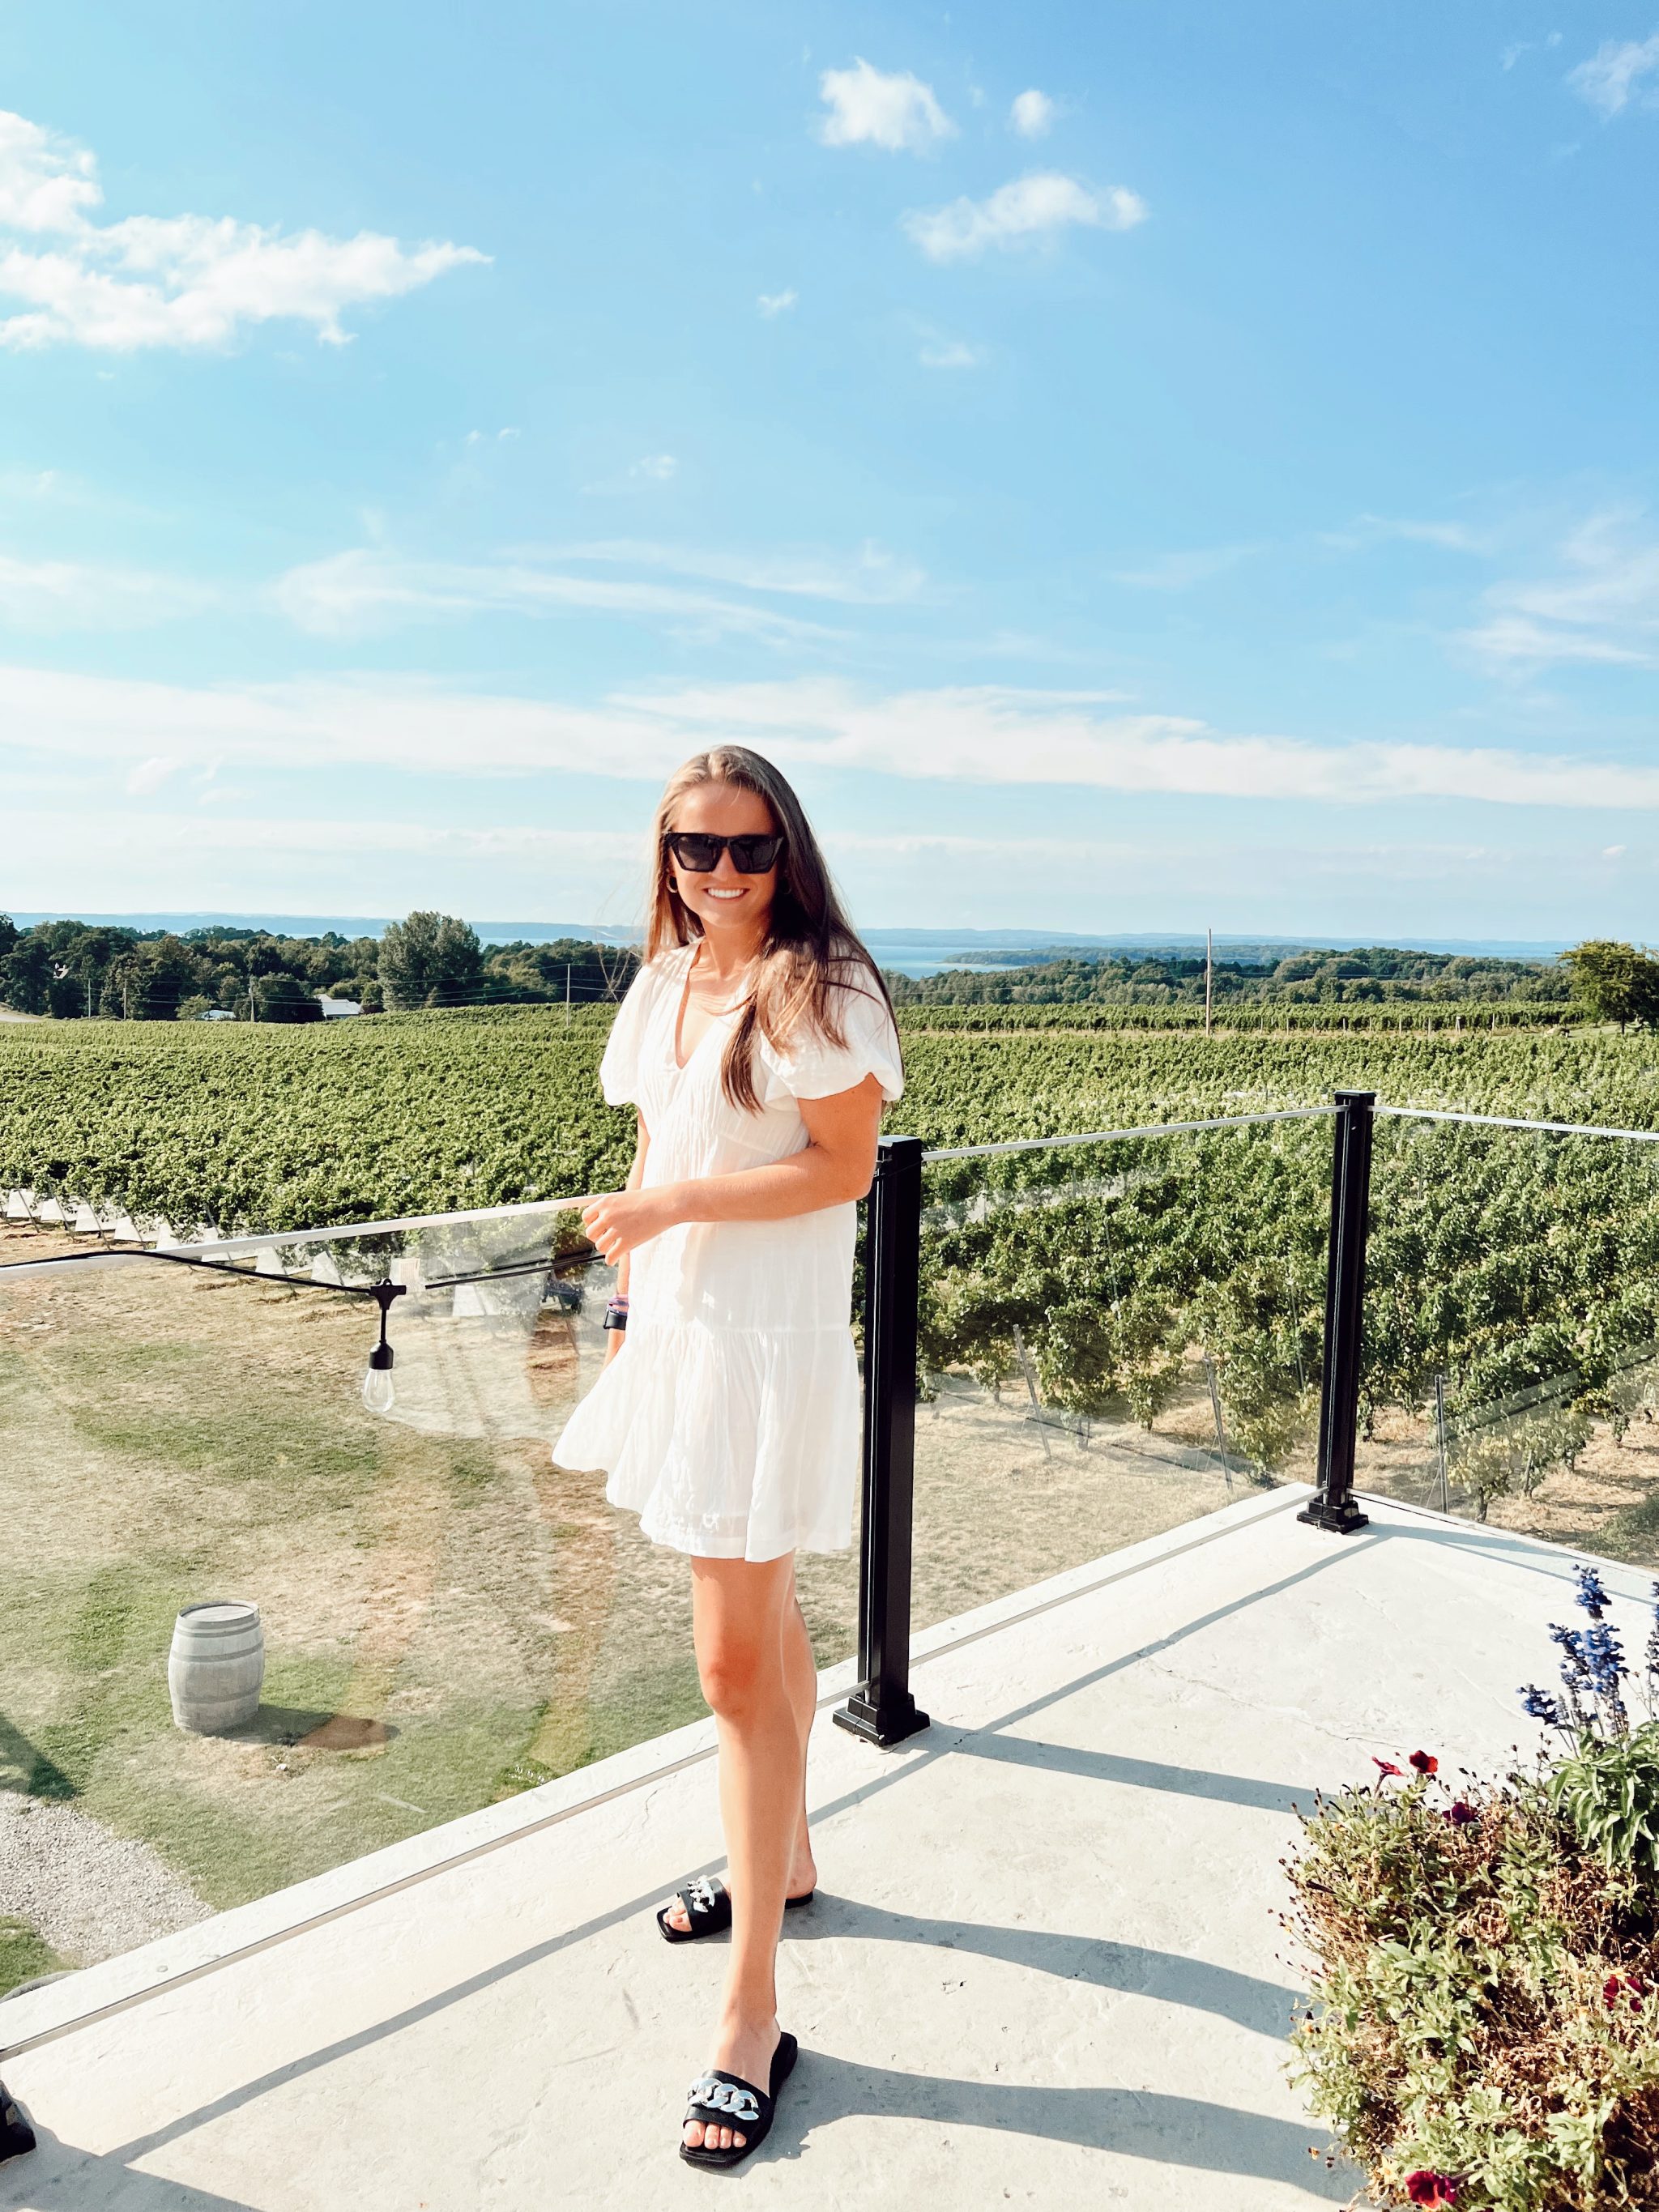 girl in white dress in front of glass rail with rows of wine grape vines in background.